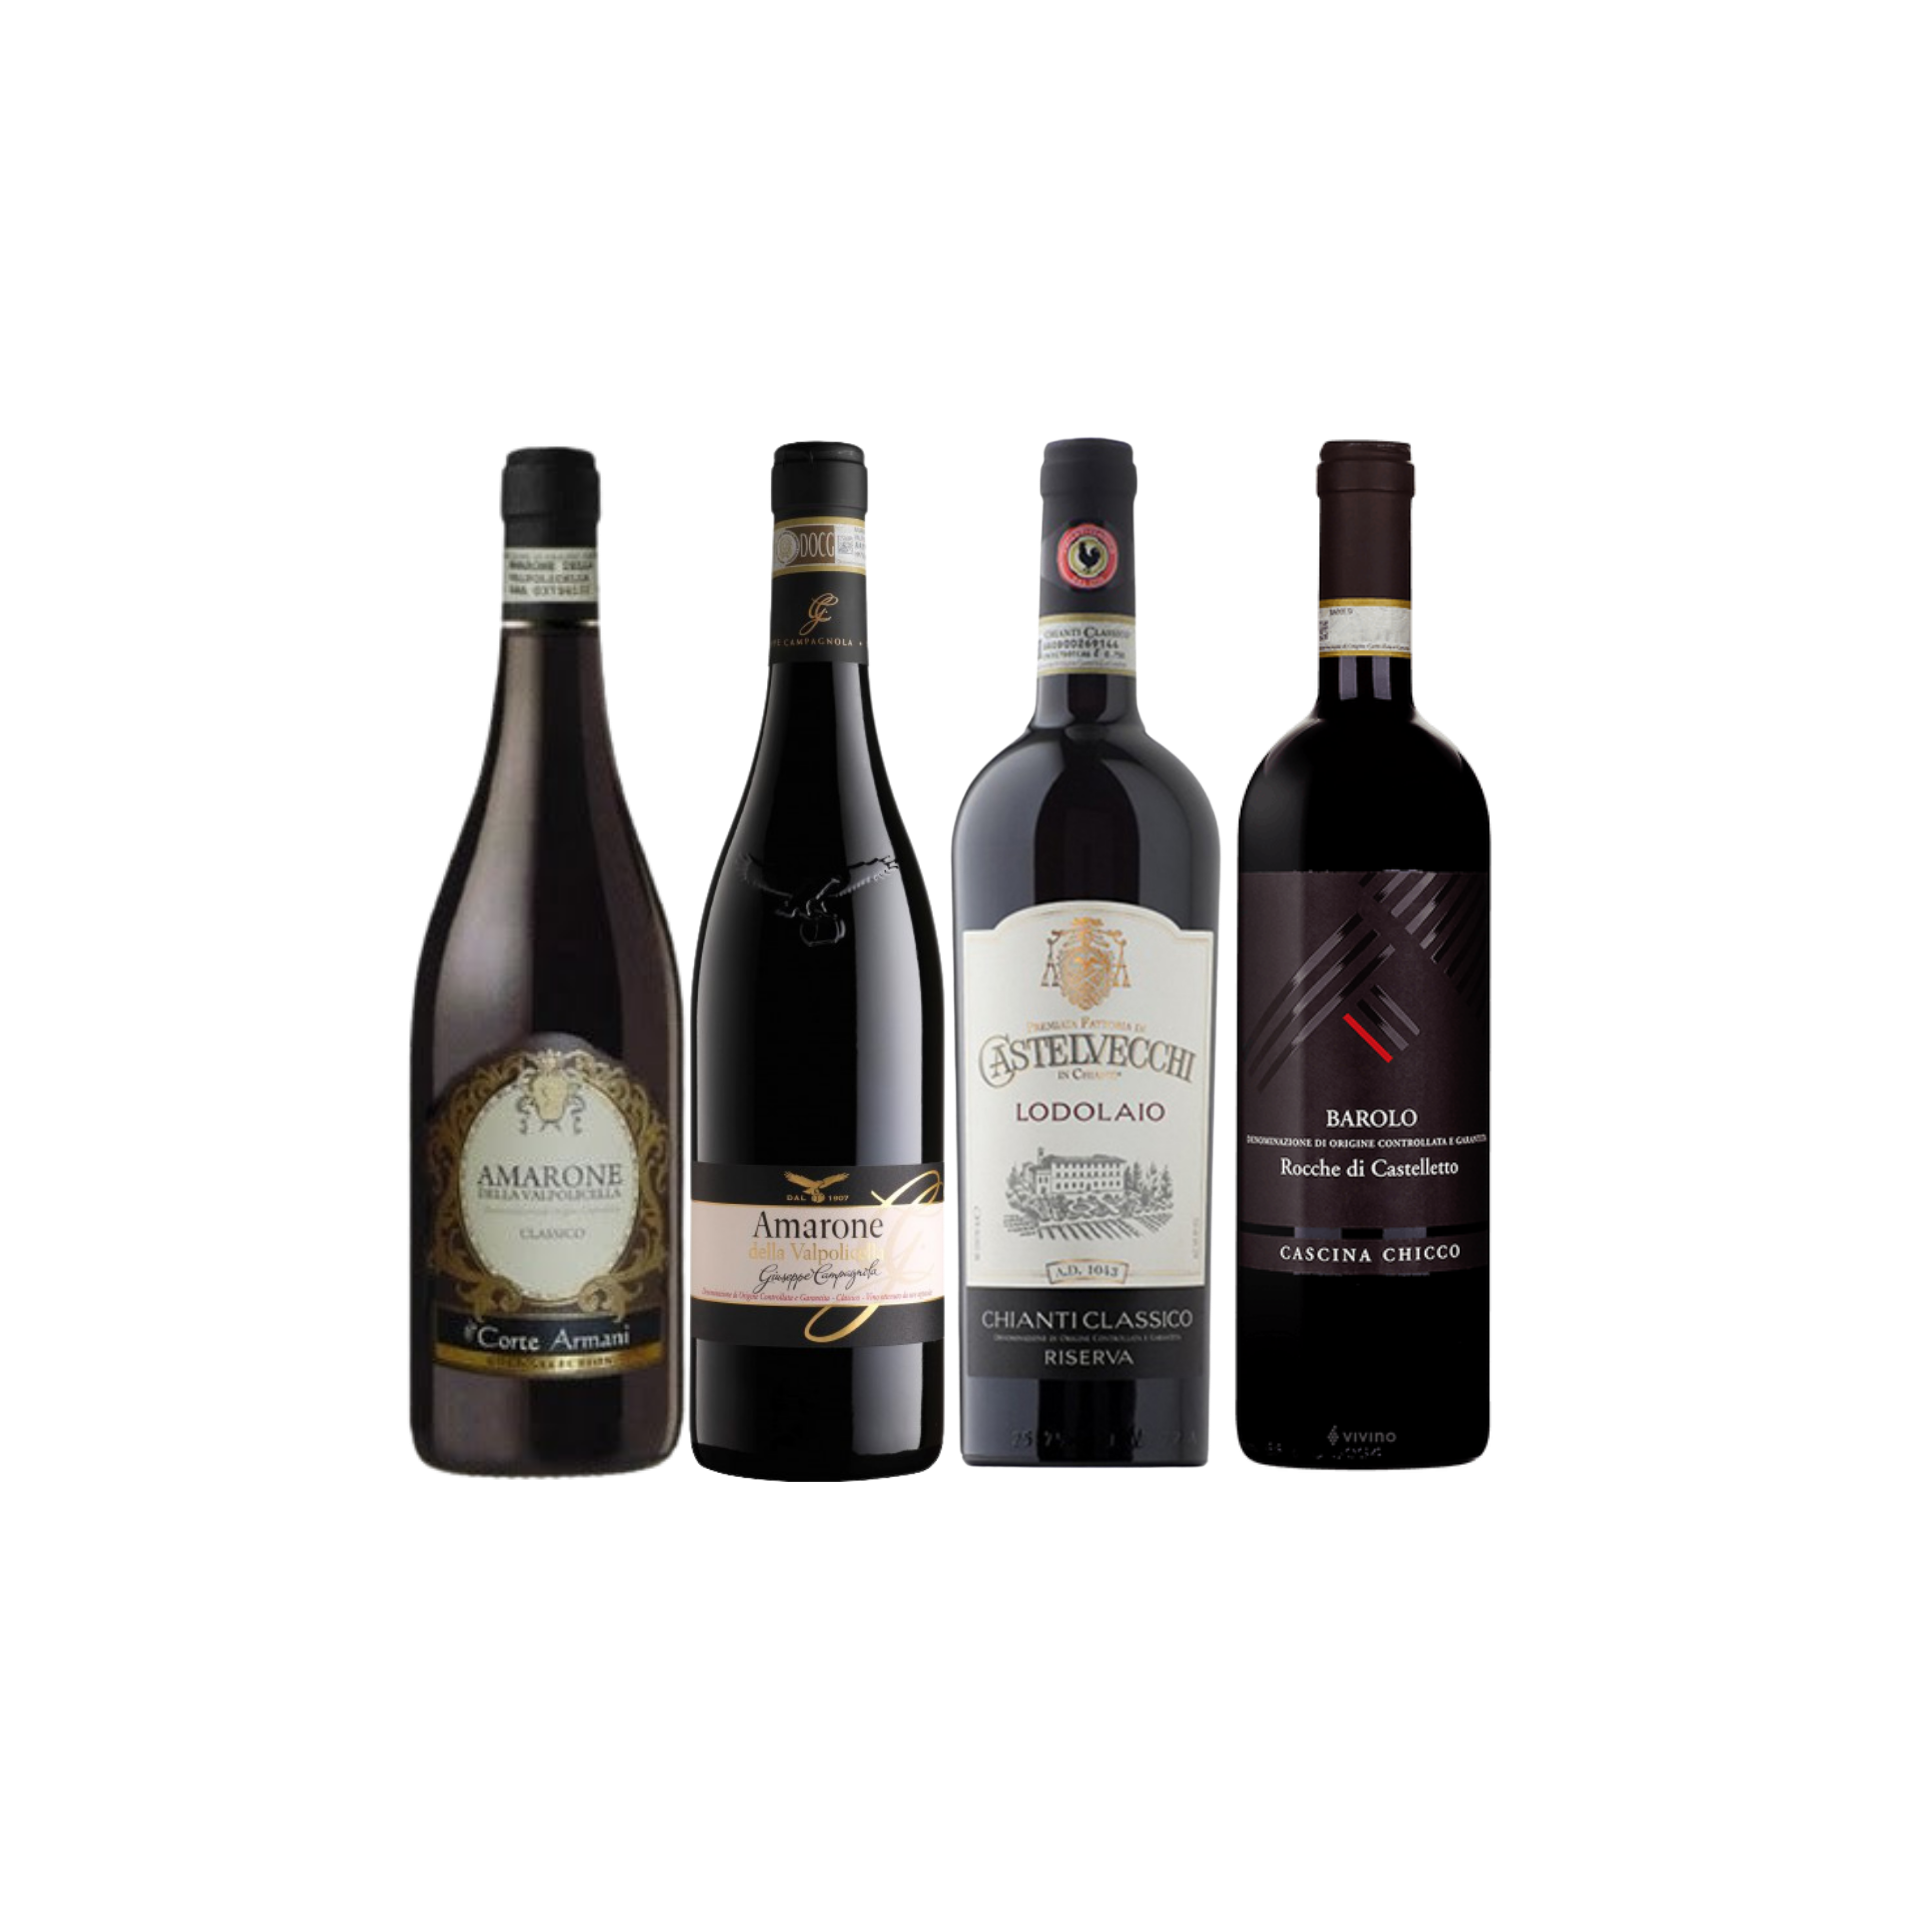 【Bundle A】 Enjoy 2 Bottles of Amarone Plus Chianti Riserva At Only $234 With A Free Set of 6 Schott Zwiesel Wine Glass worth $90 And Top-Up $68 for A Bottle of Barolo Worth $85